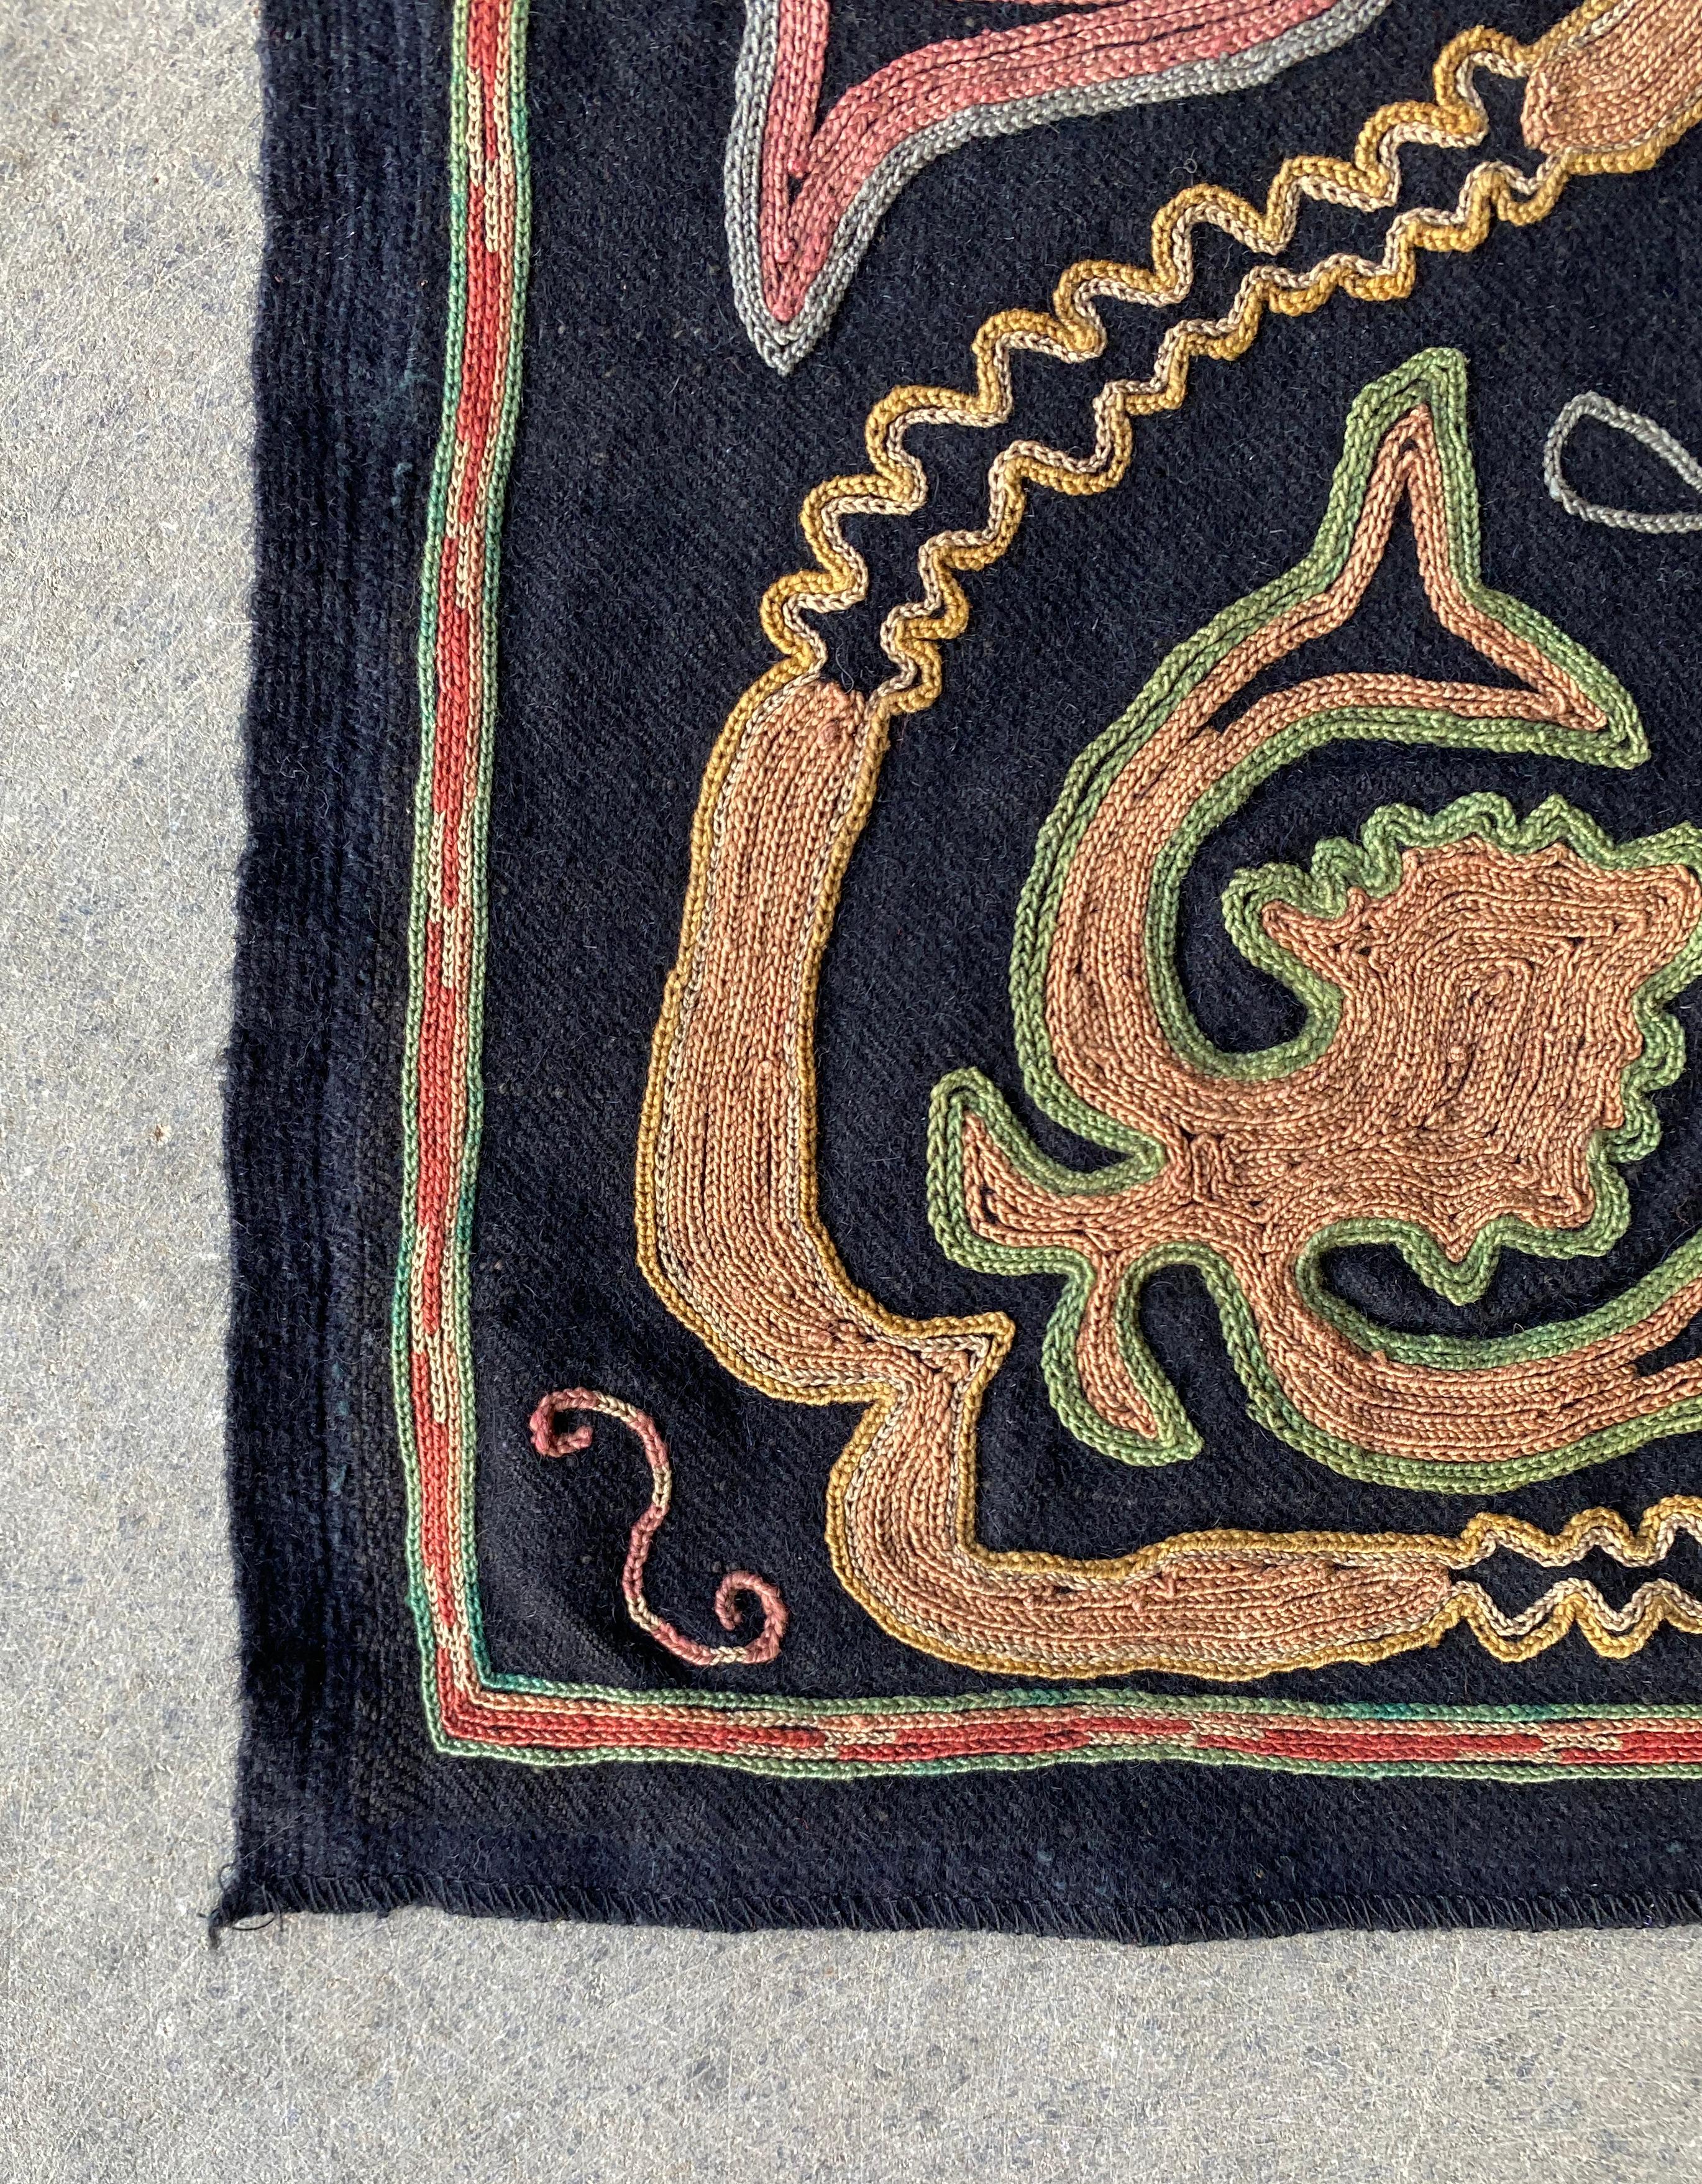 Central Asian Embroidered Textile, “Suzani”, Mid 20th Century  In Good Condition For Sale In Jimbaran, Bali